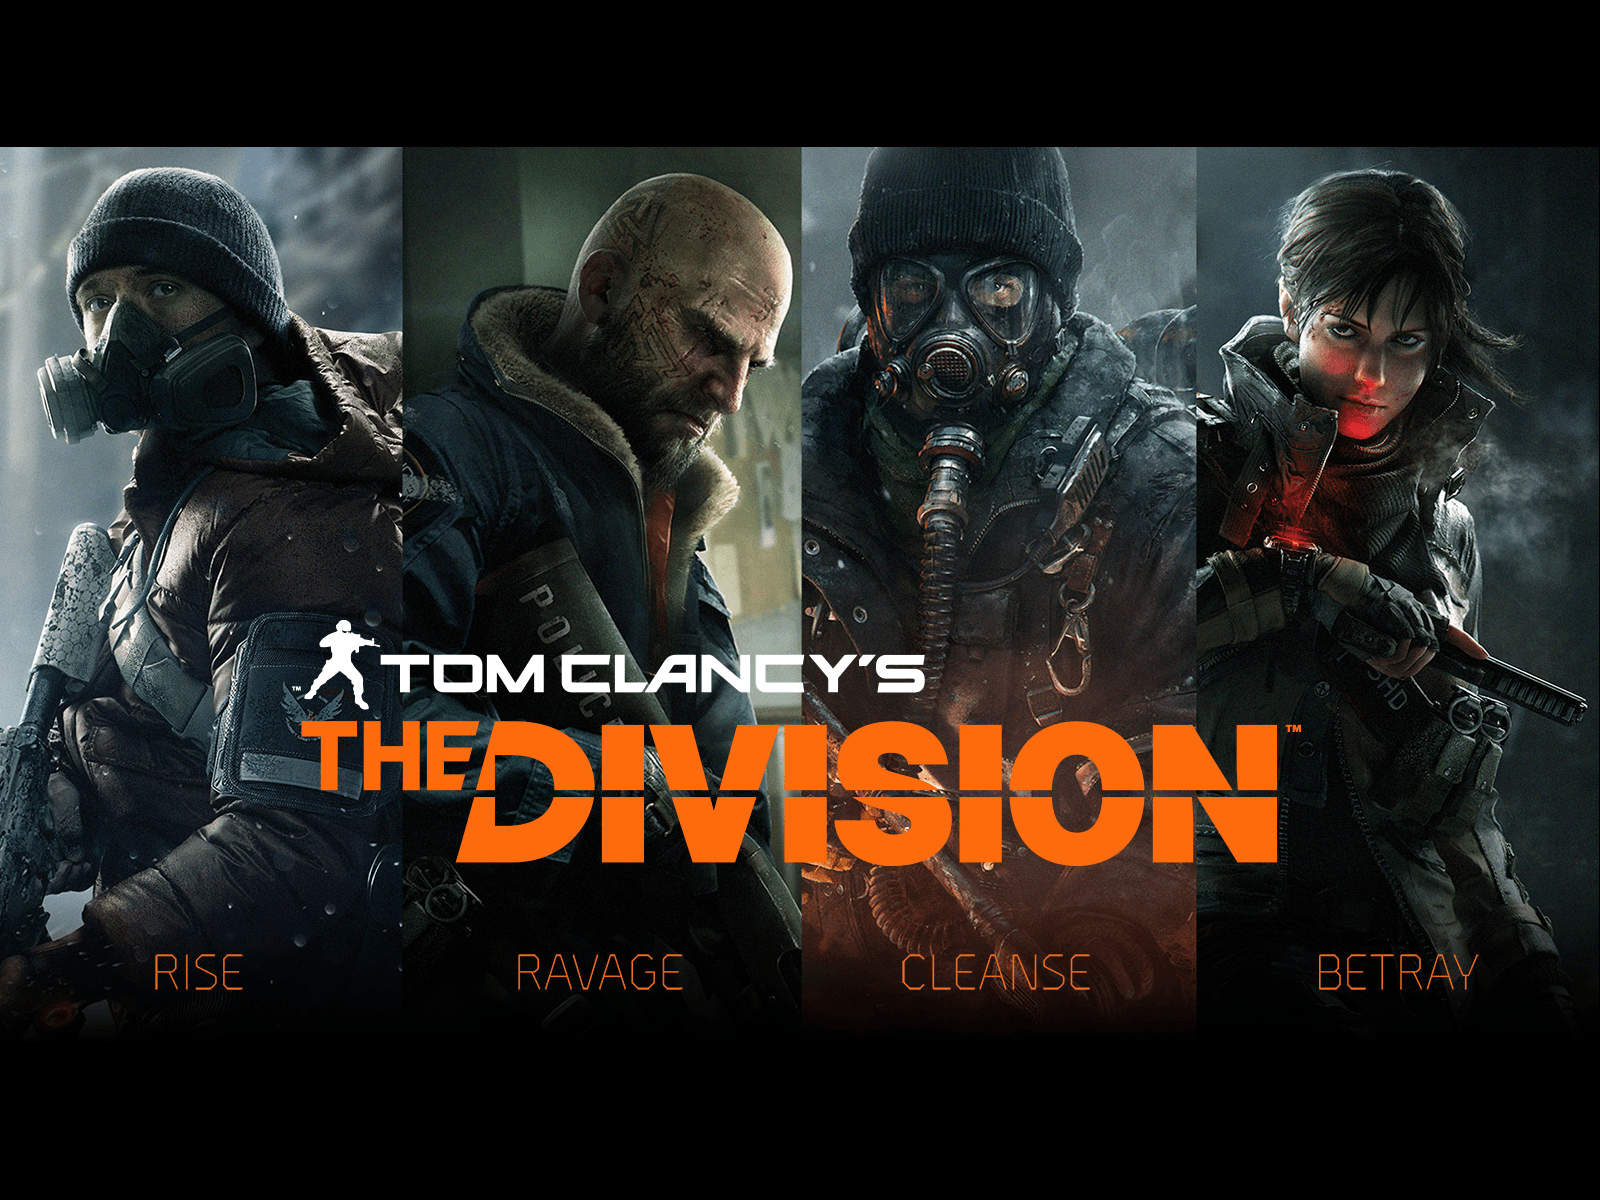 The Division Faction Logo - The Different Roles in The Division